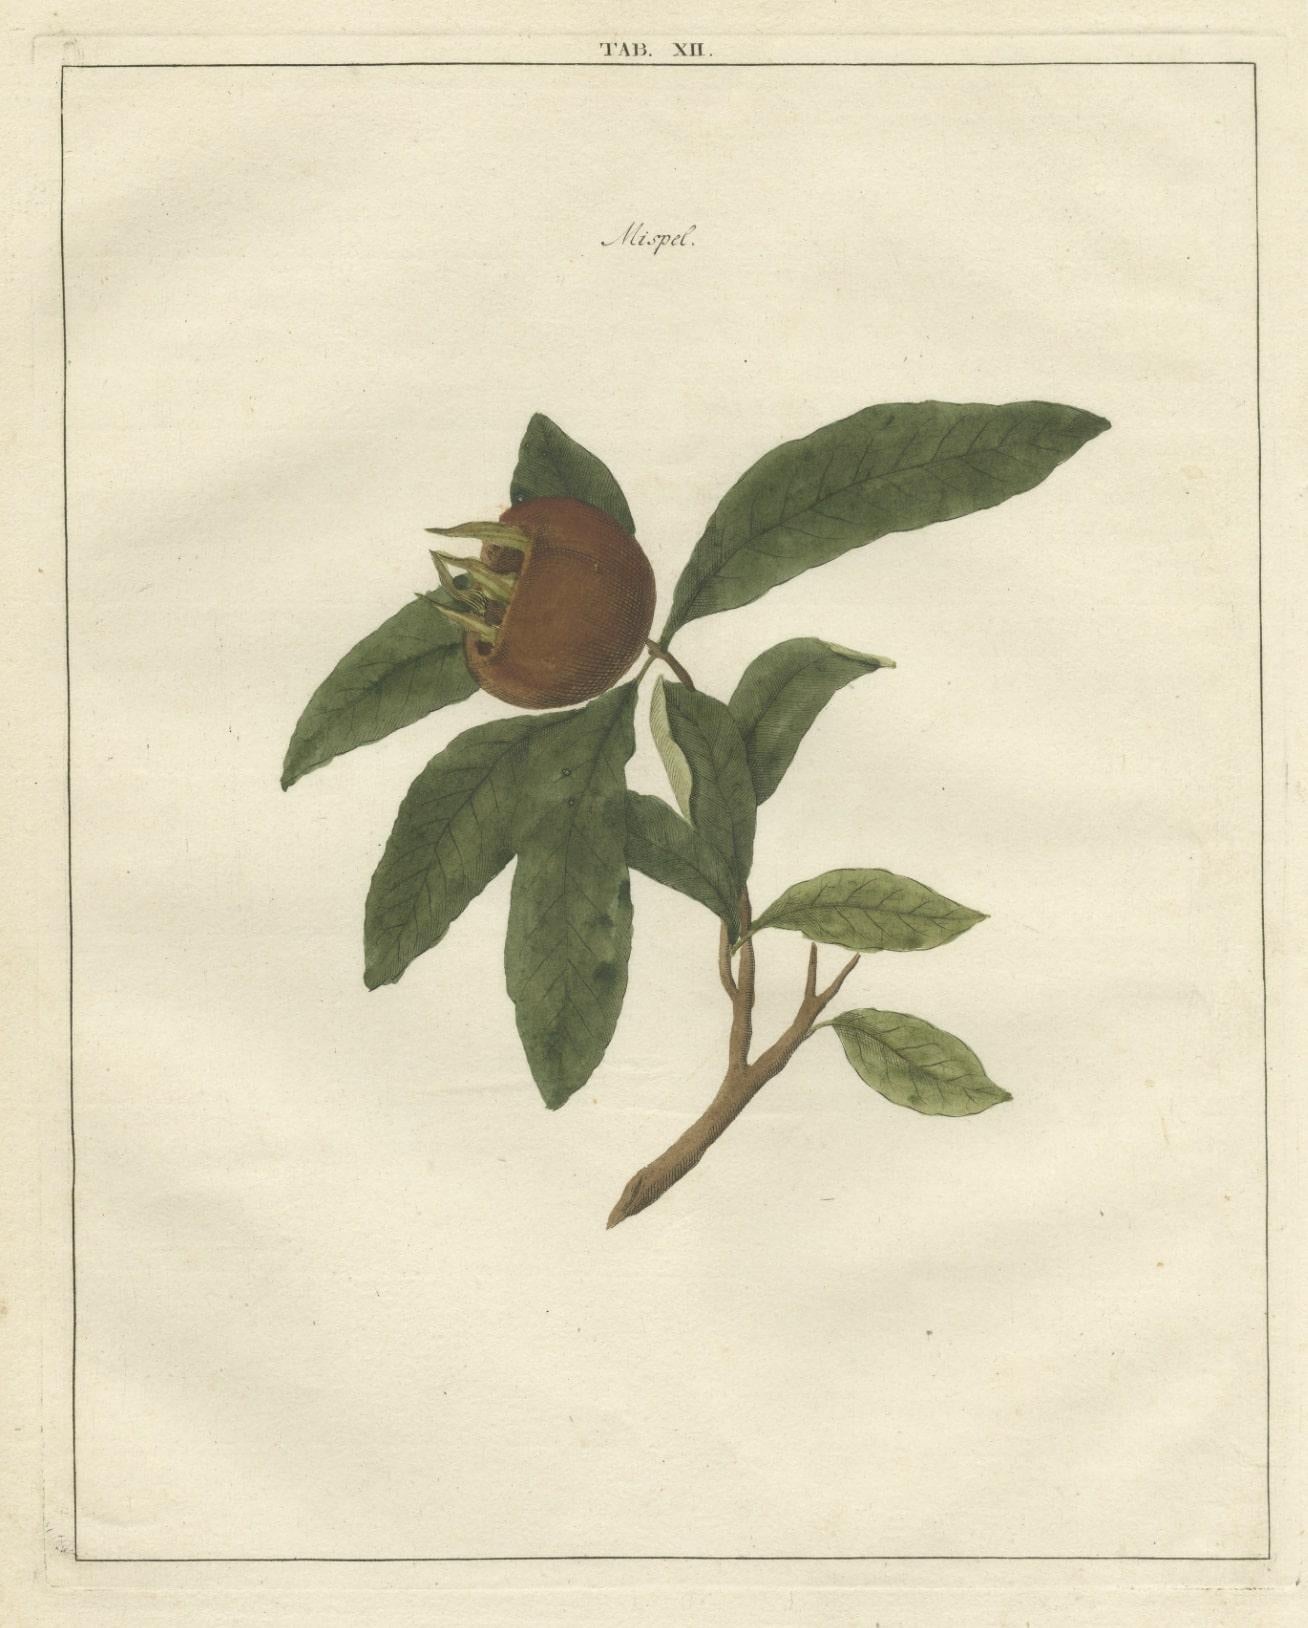 Antique print of the medlar. Originates from 'Pomologia' by J. H. Knoop.

Artists and Engravers: Published by Johann Hermann Knoop (c.1700-1769).